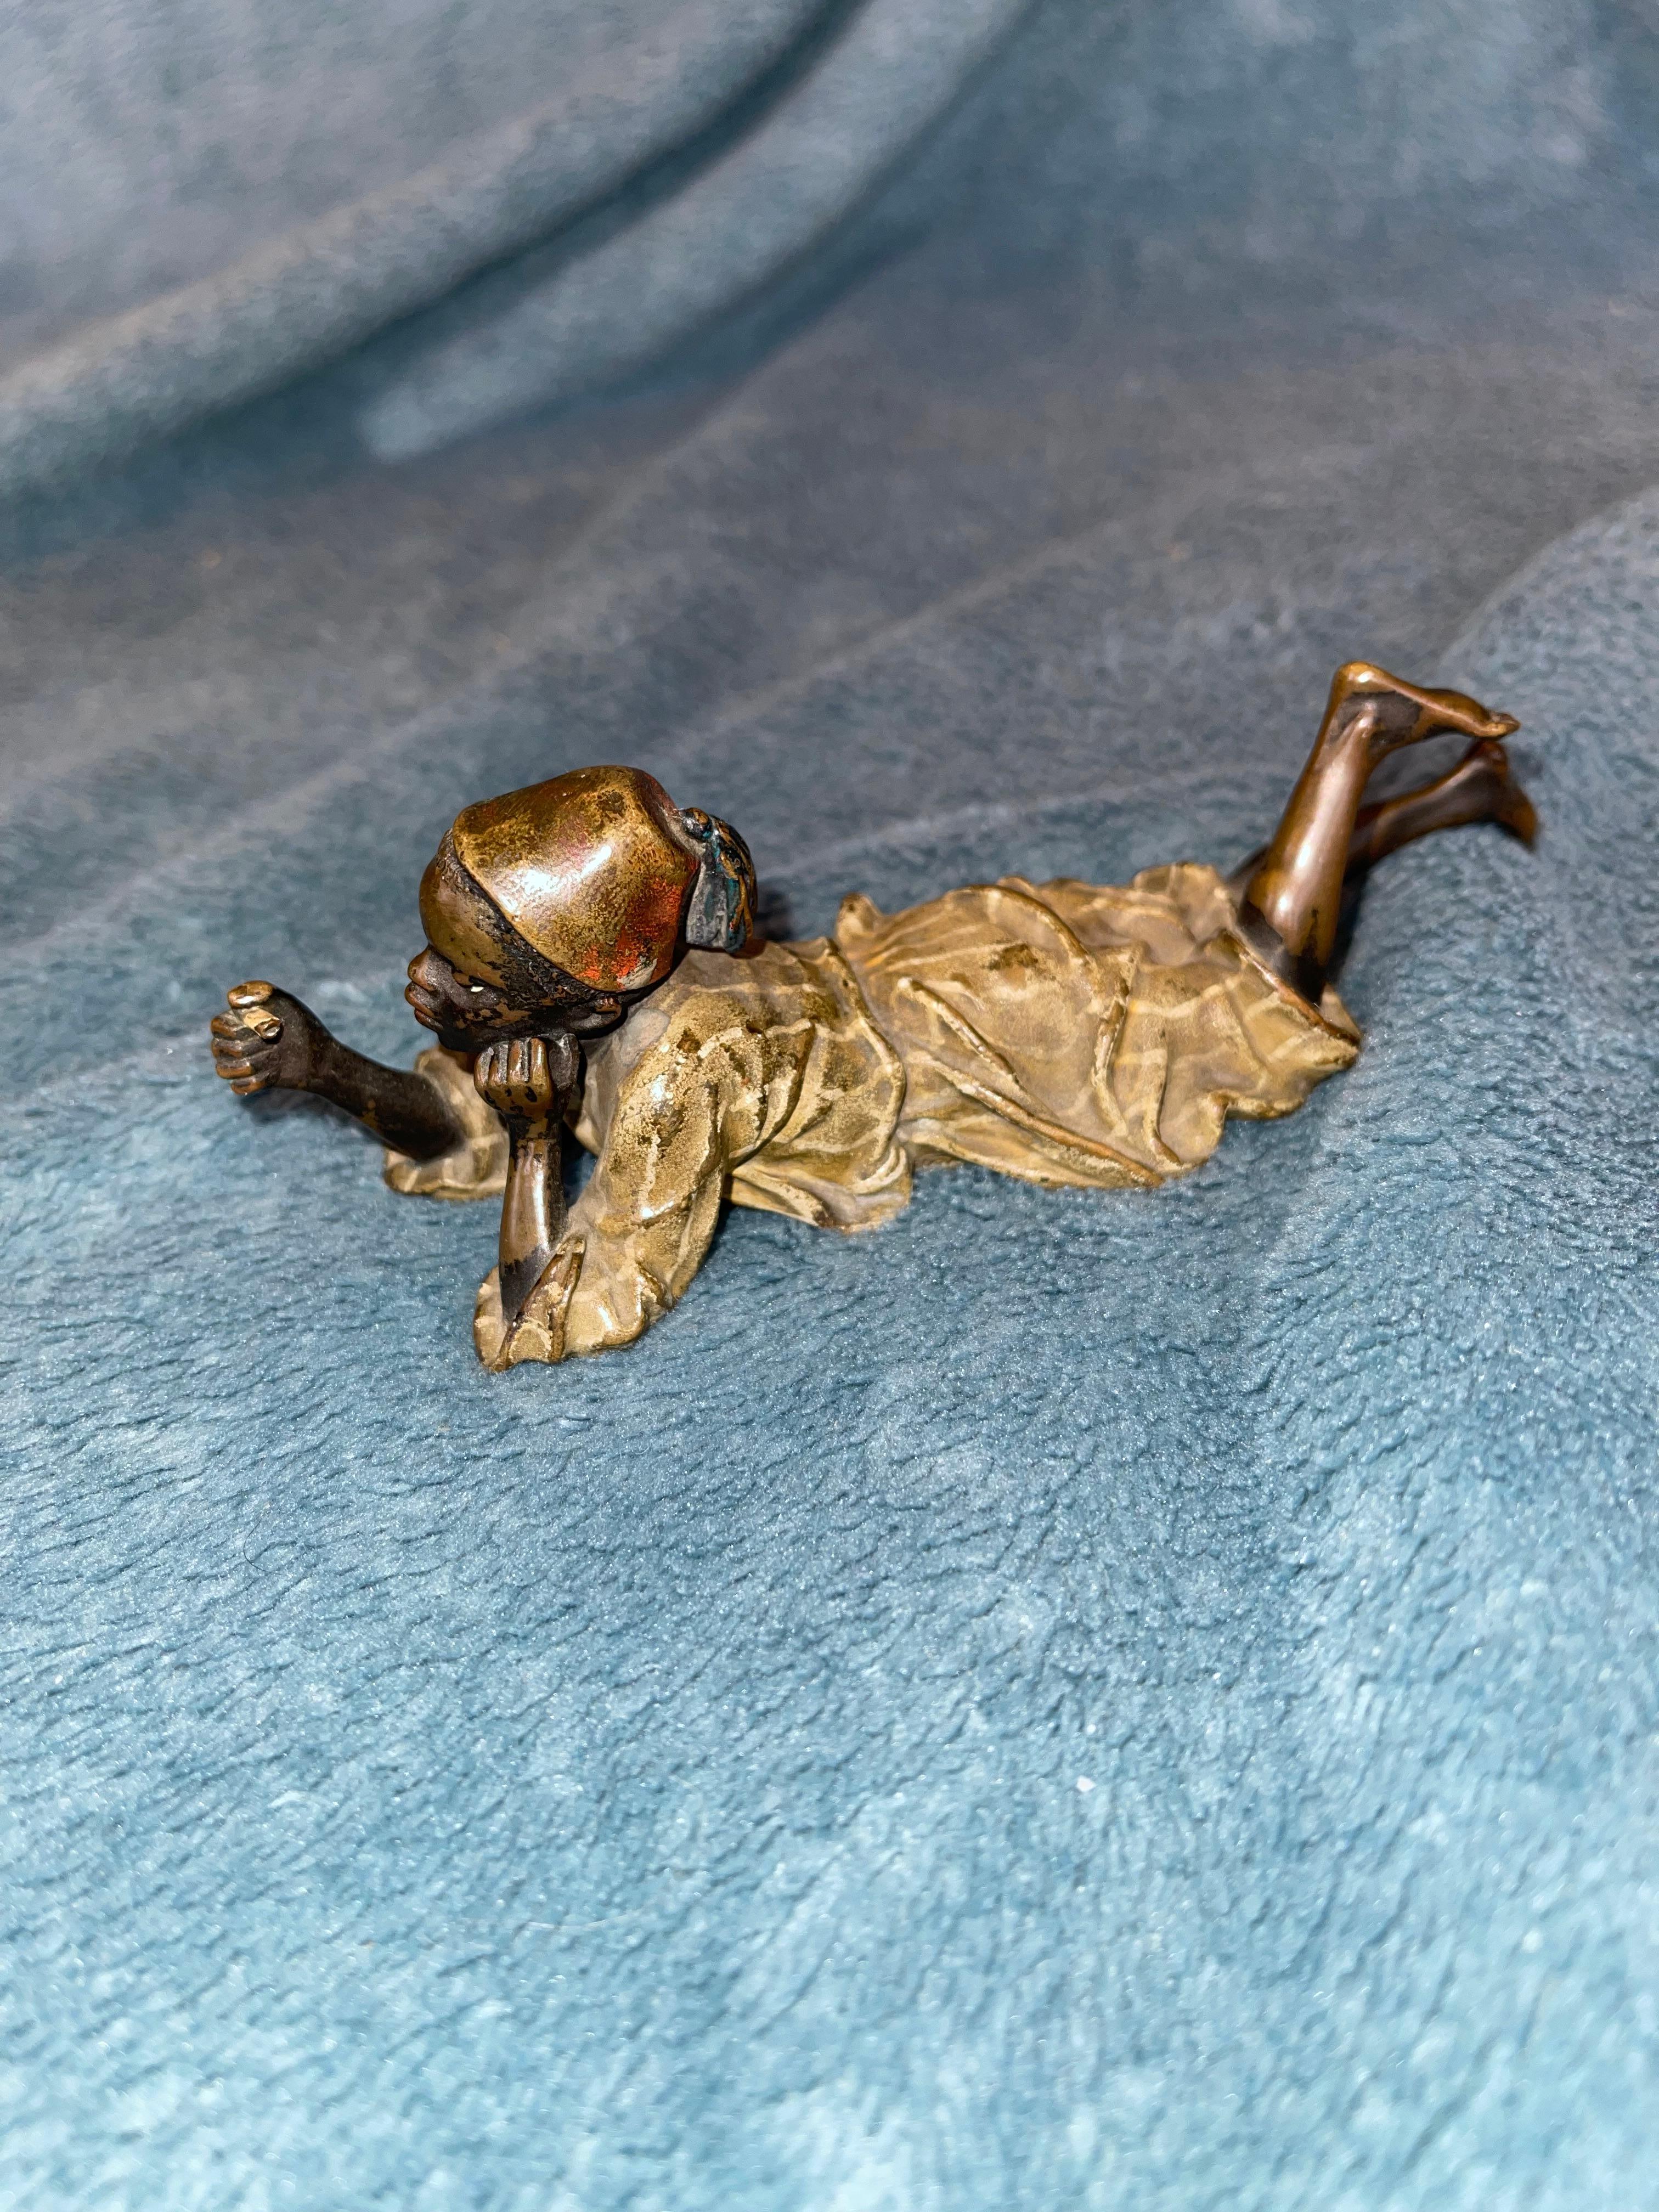  This well designed and executed Vienna bronze has a young boy resting on his stomach and enjoying what is left of a cigar. His clothes are meticulously cold painted, and this bronze is signed in multiple areas. It does bear the Bergmann Foundry